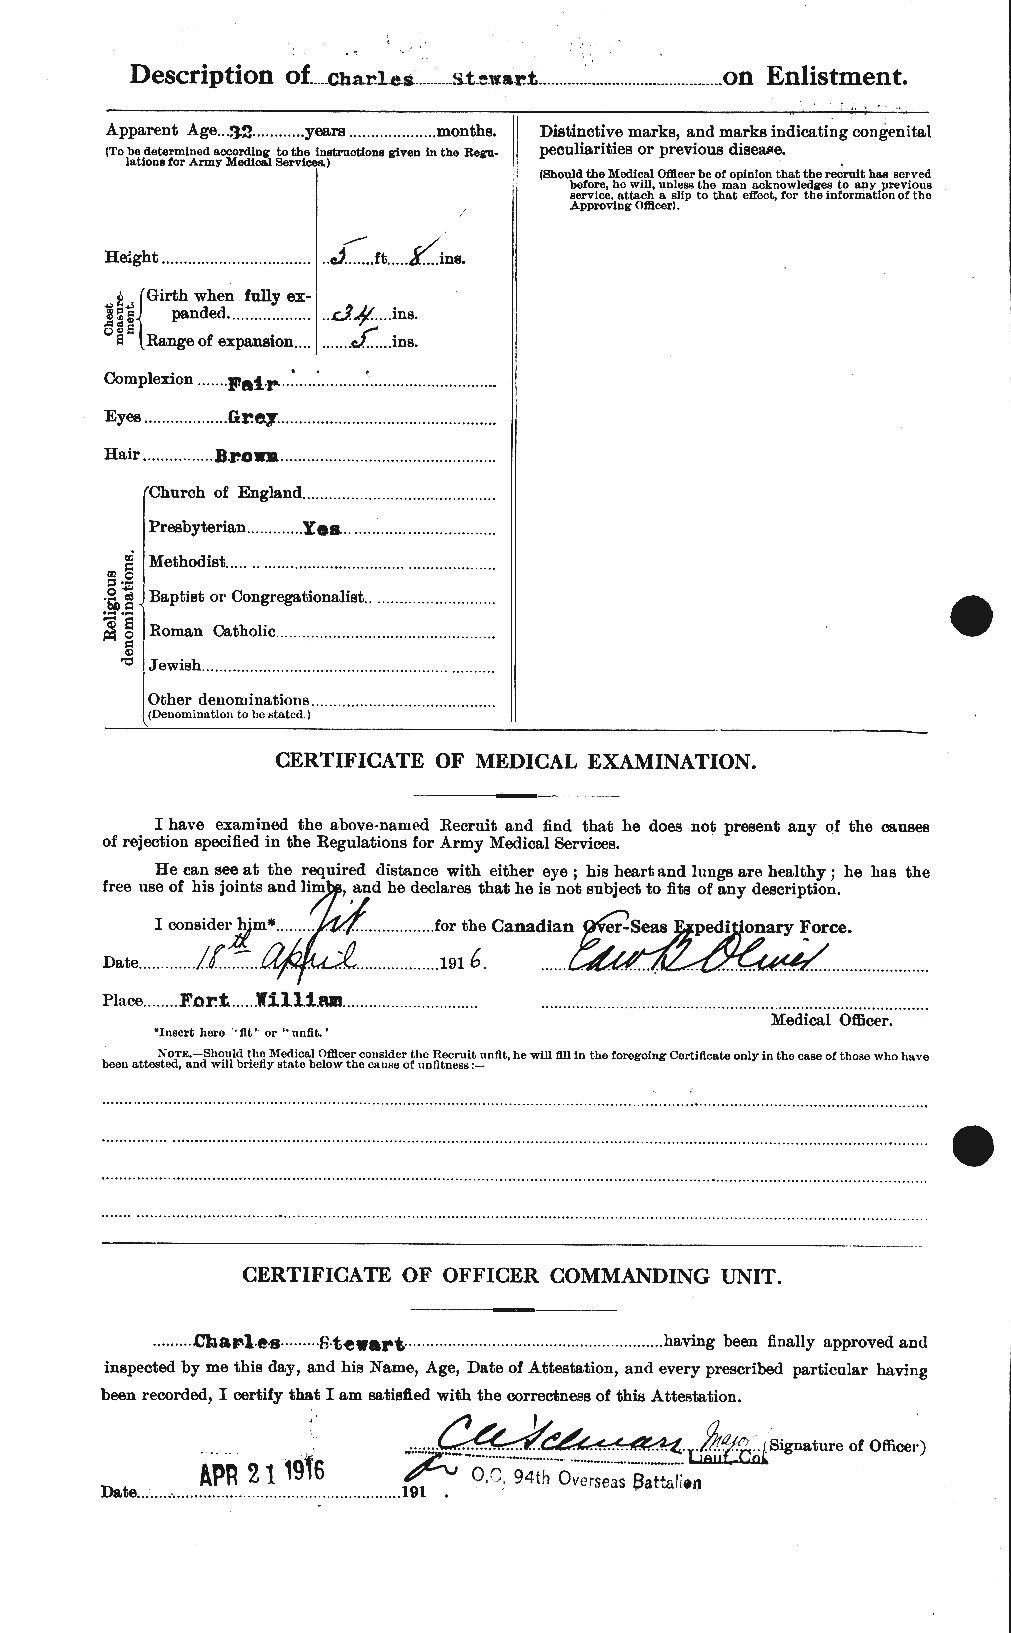 Personnel Records of the First World War - CEF 118210b